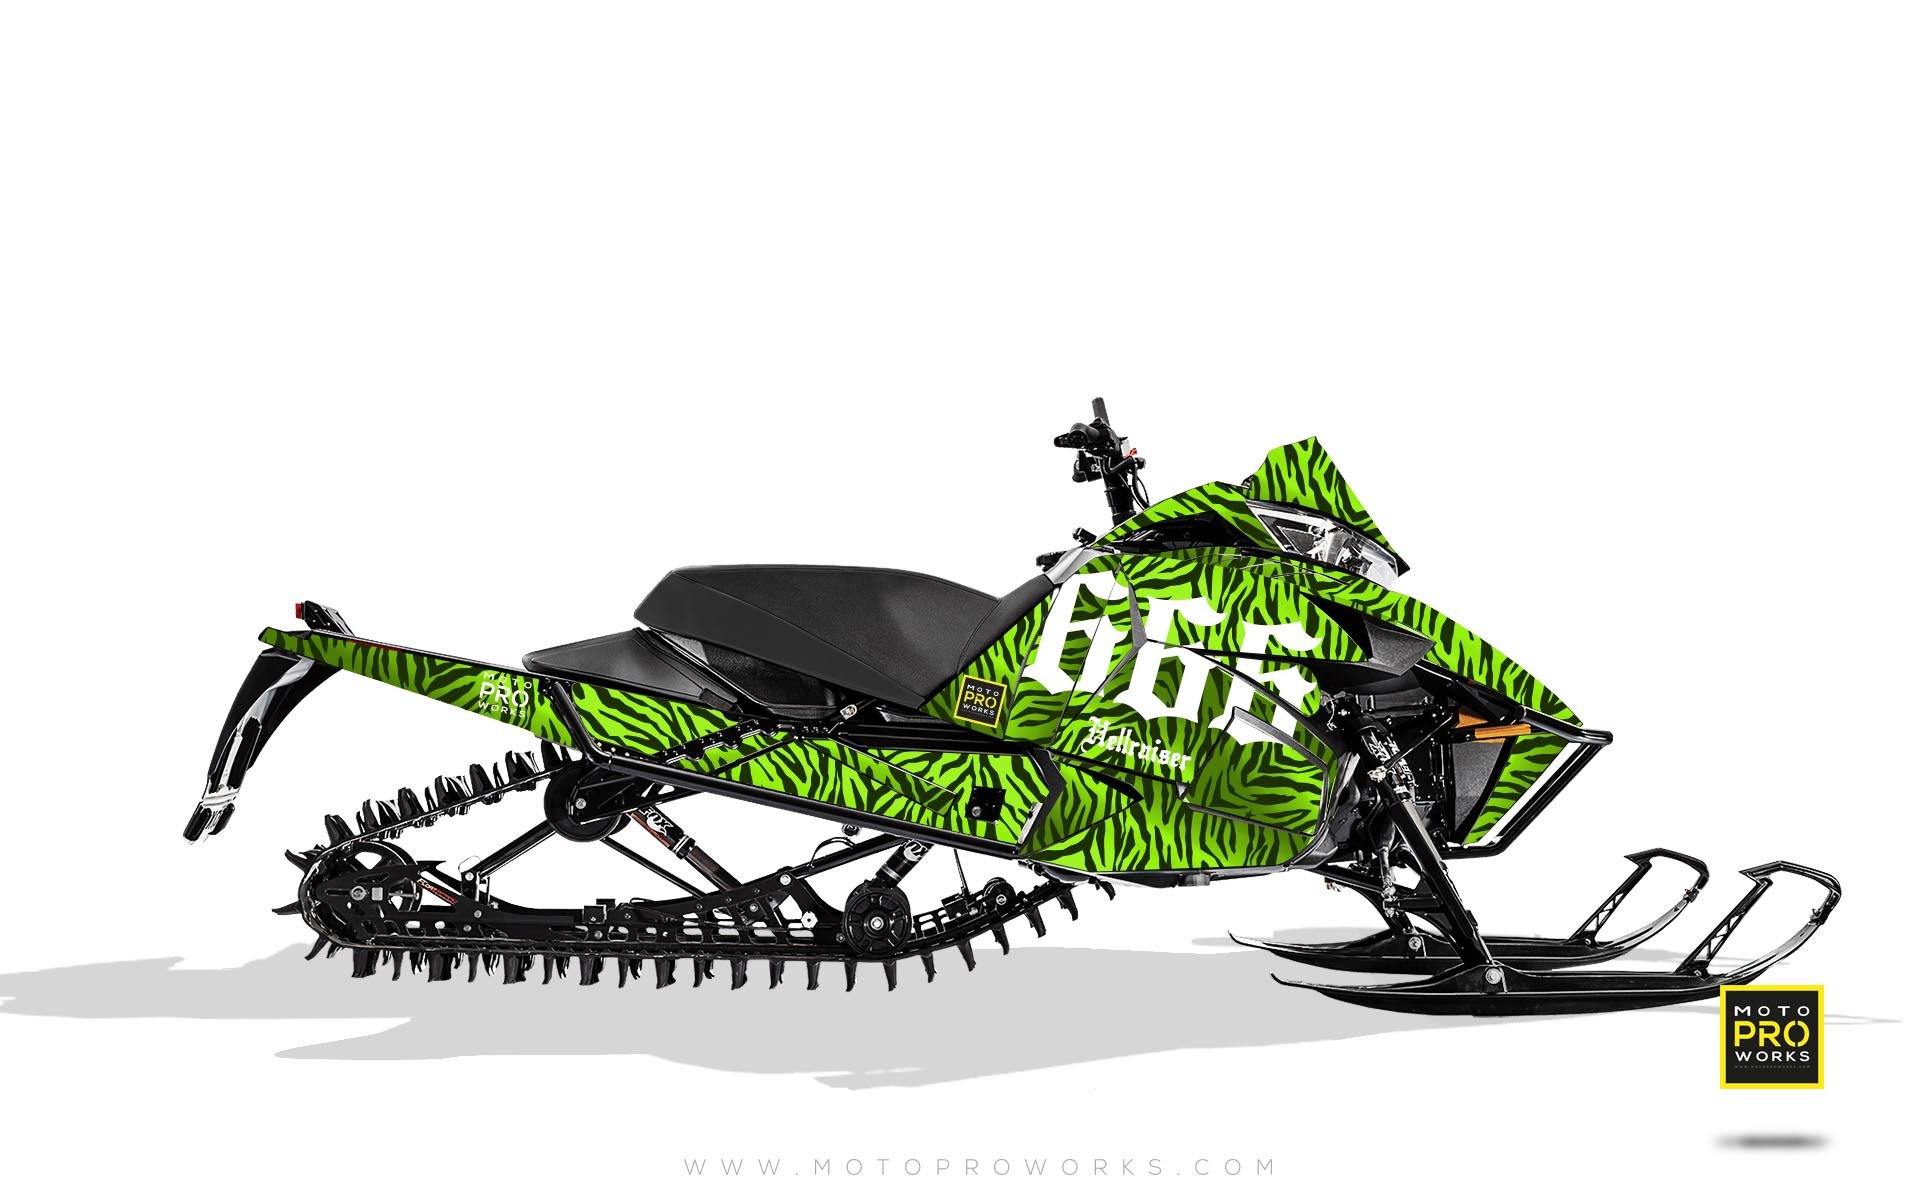 Arctic Cat Graphics - "Stripey" (green) - MotoProWorks | Decals and Bike Graphic kit